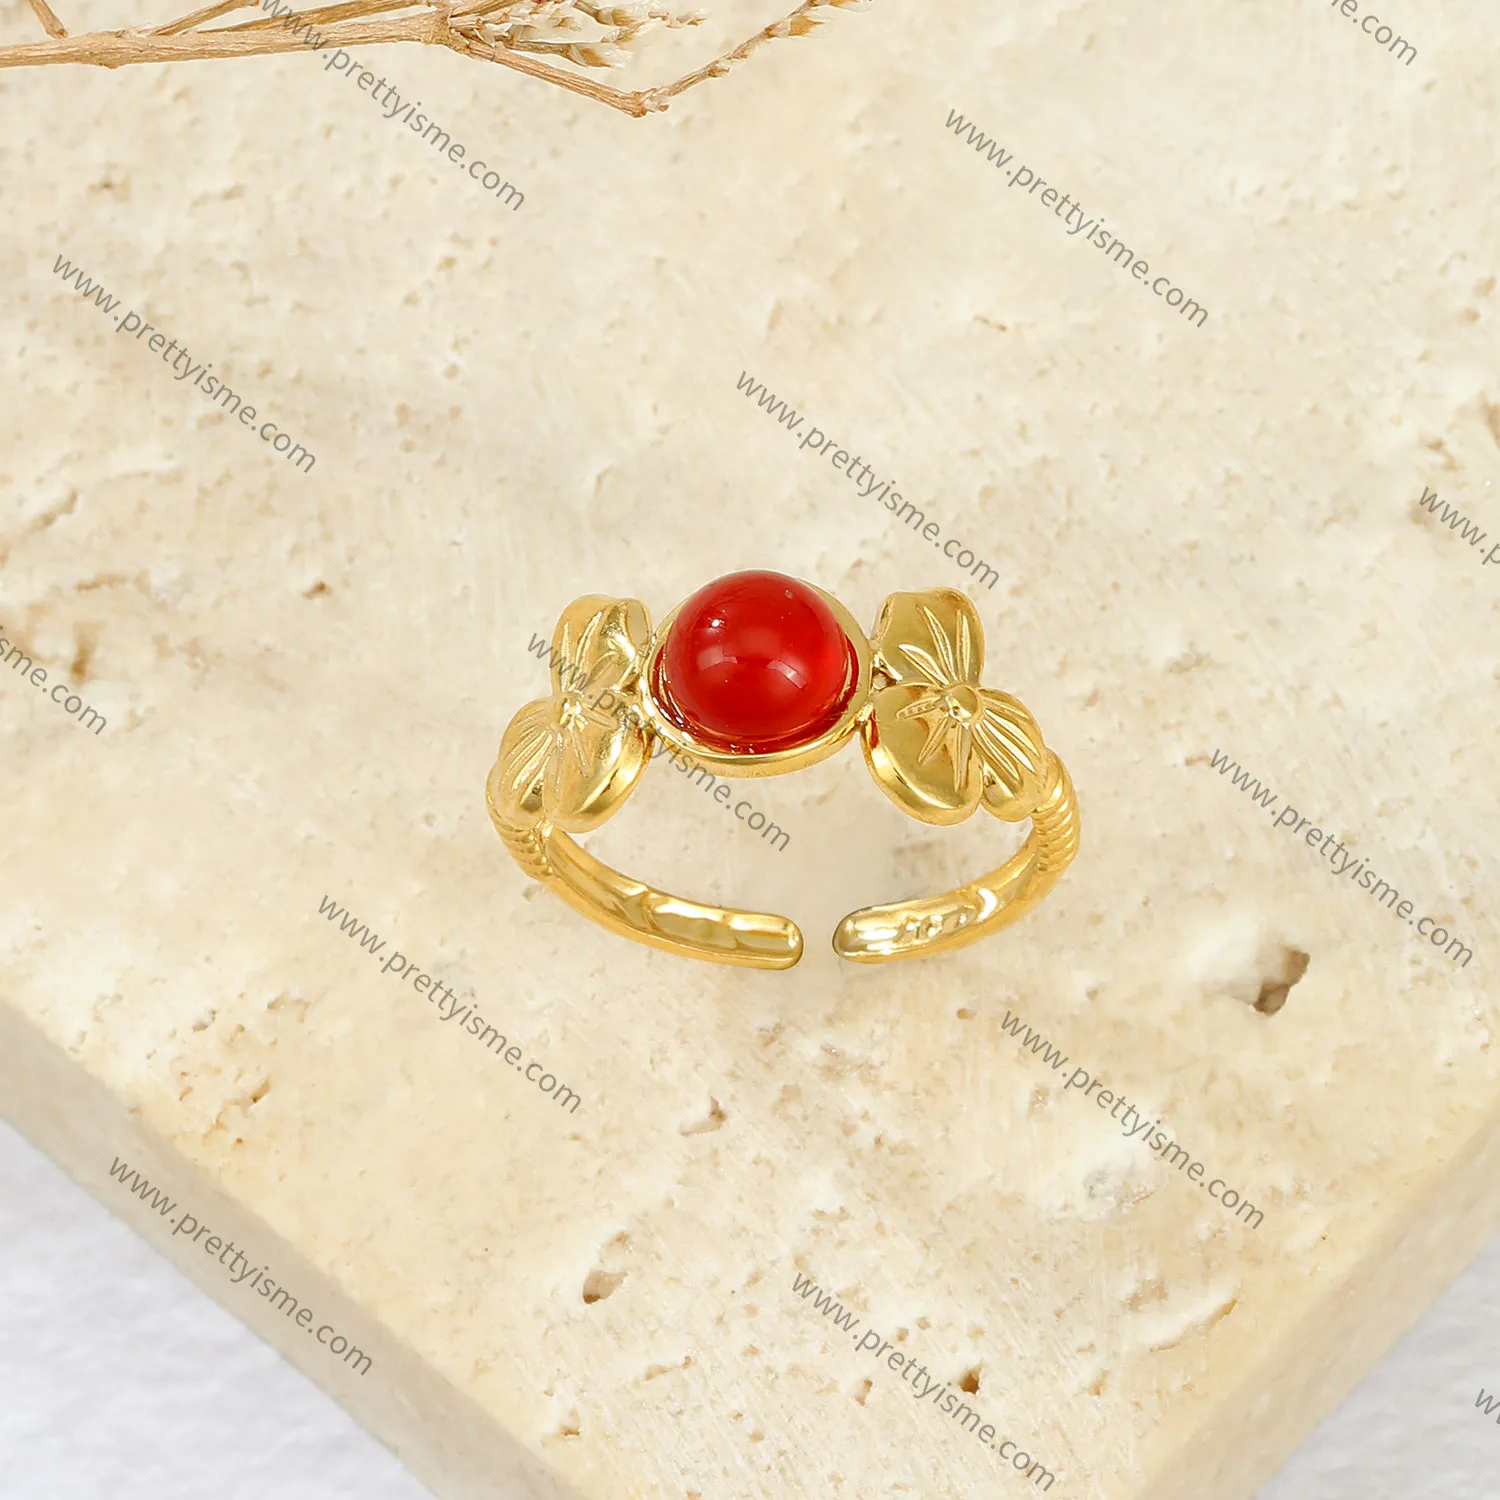 Delicate French Style Stainless Steel Open Ring Set with Charming Red Gemstone Thin Ring.webp